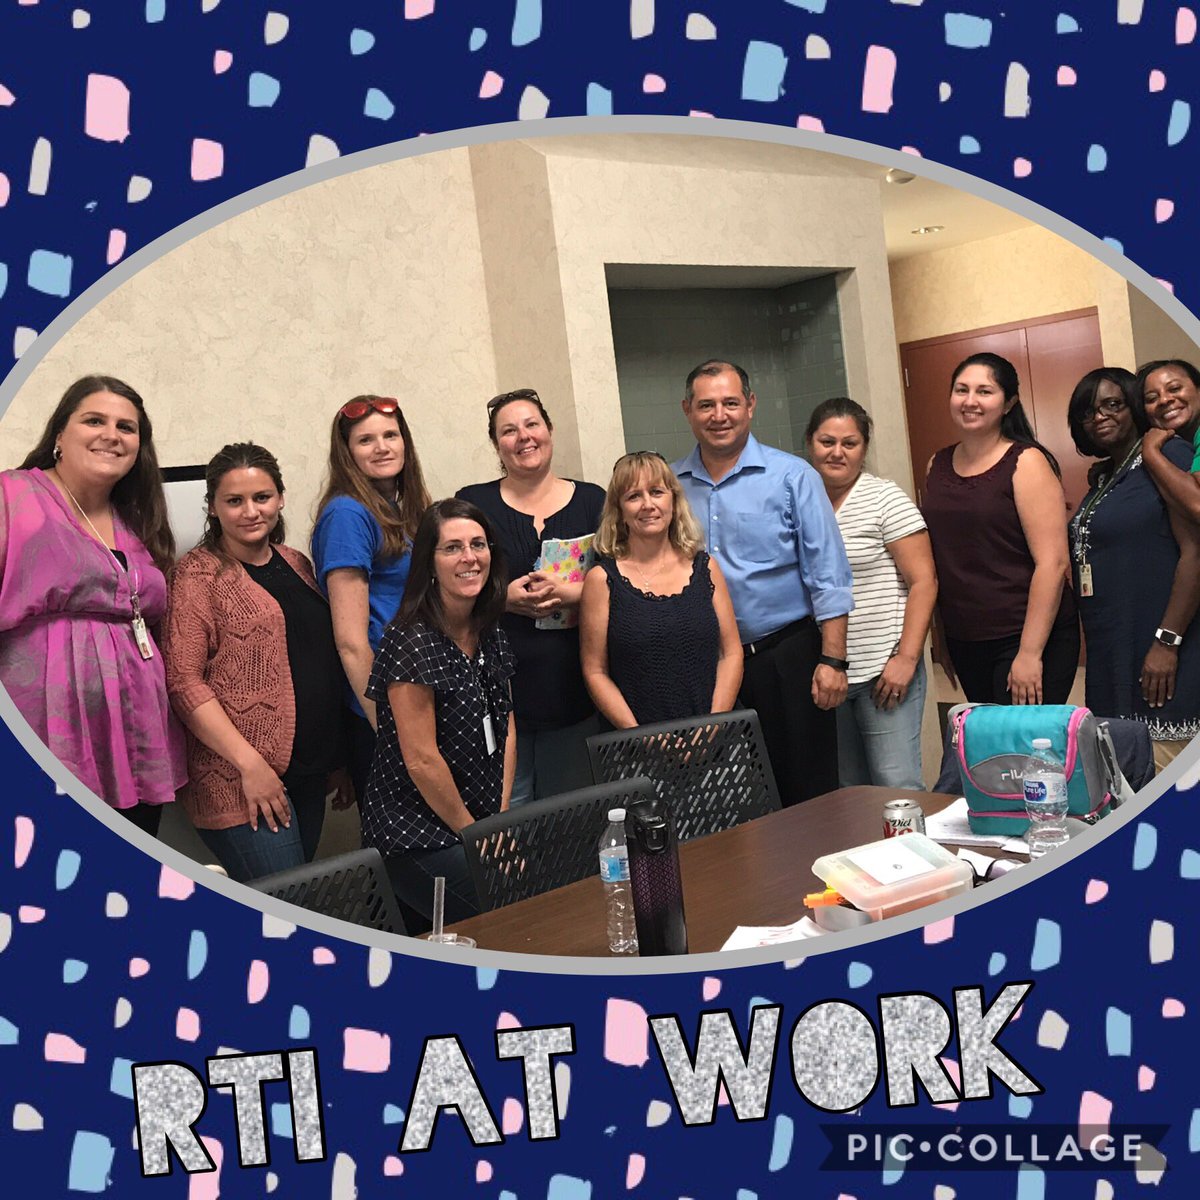 What a great day of building #sharedknowledge !! Geri from @SolutionTree did an amazing job w/ #RTIatwork !! @ValVerdeUSD #allmeansall